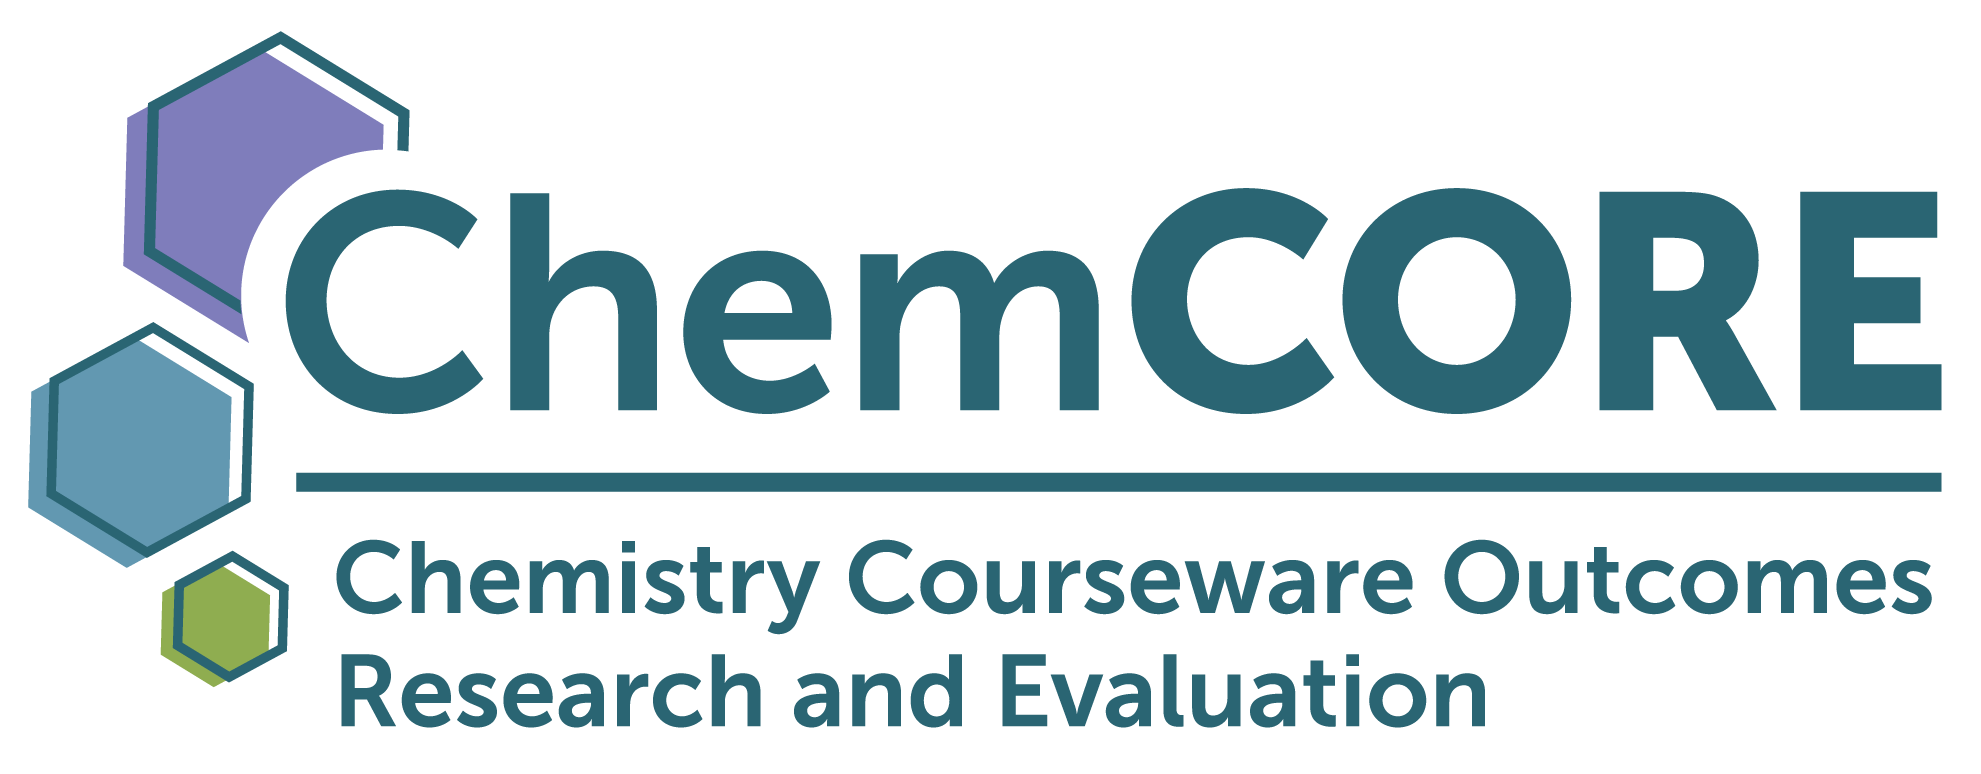 An image of the ChemCORE logo, including the tagline chemistry courseware outcomes research and evaluation